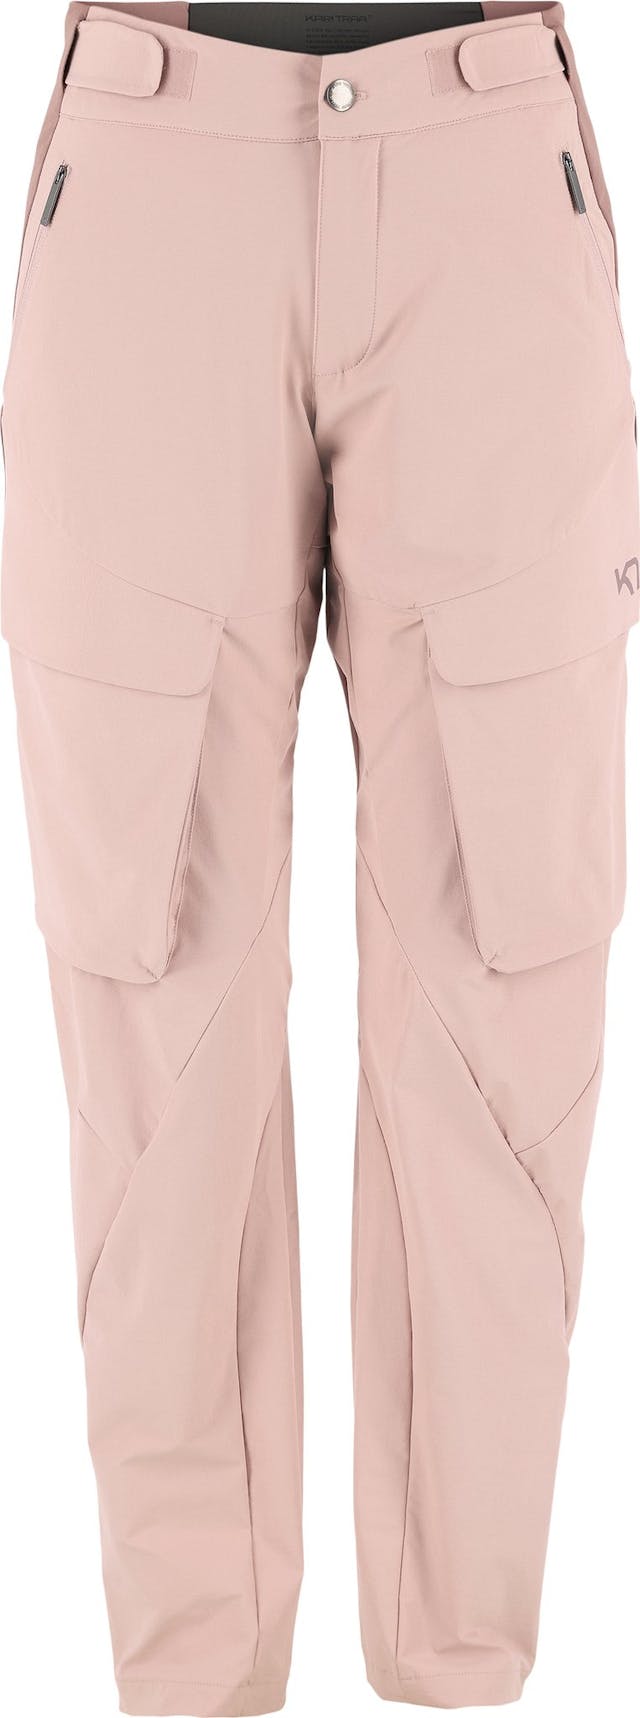 Product image for Ane Hiking Pant - Women's